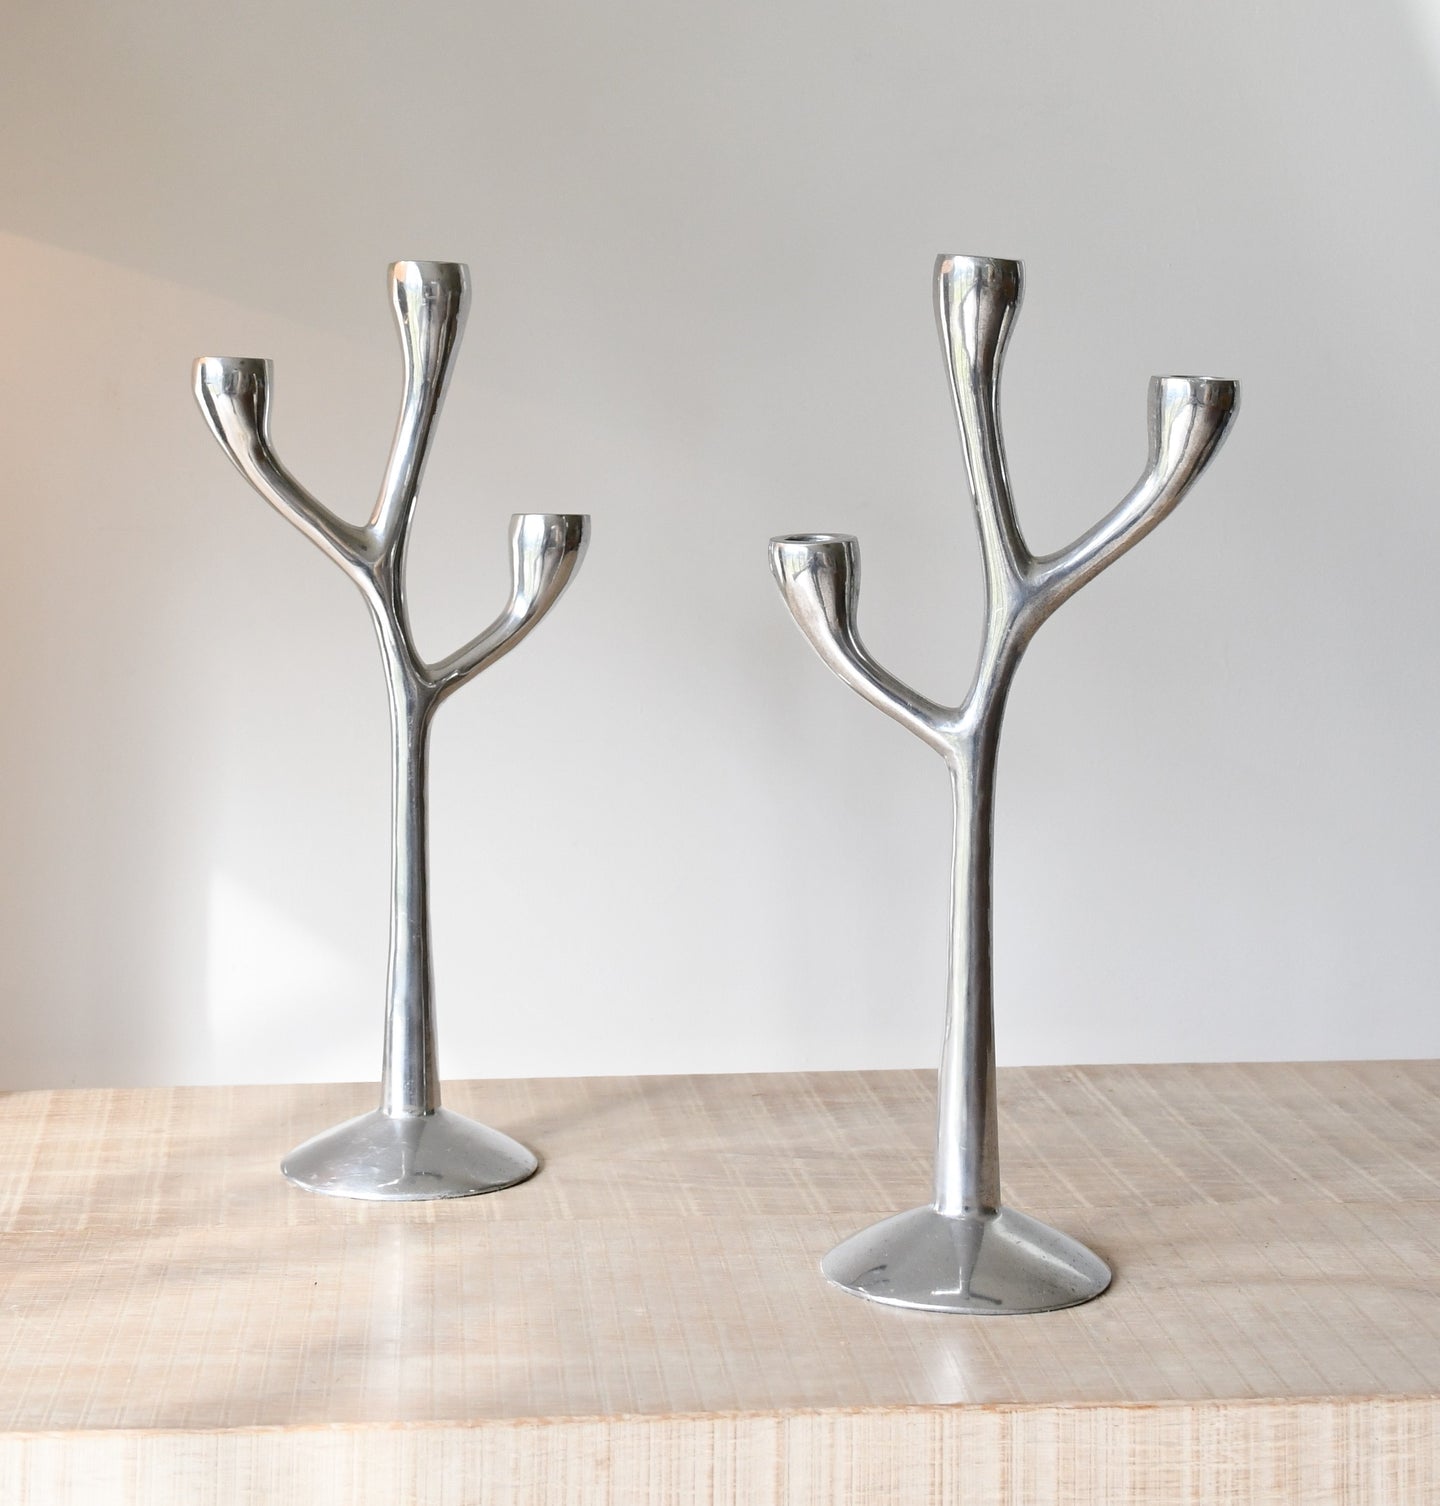 A Pair of Vintage - Naturalistic Candelabras